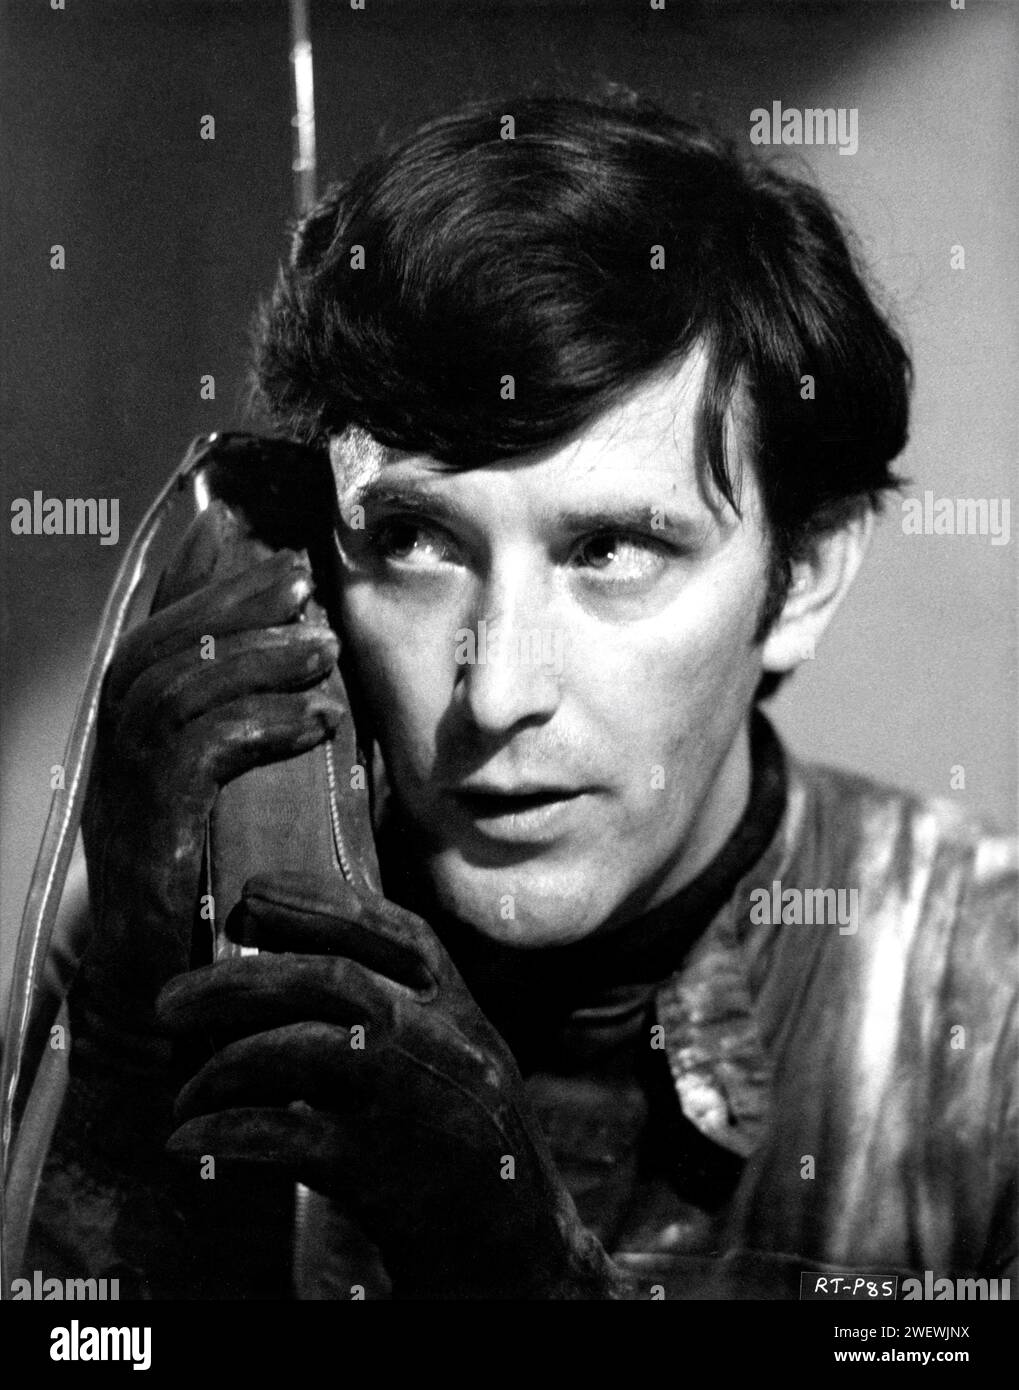 TOM BELL in HE WHO RIDES A TIGER 1965 director CHARLES CRICHTON writer Trevor Peacock David Newman Productions / British Lion Film Corporation Stock Photo